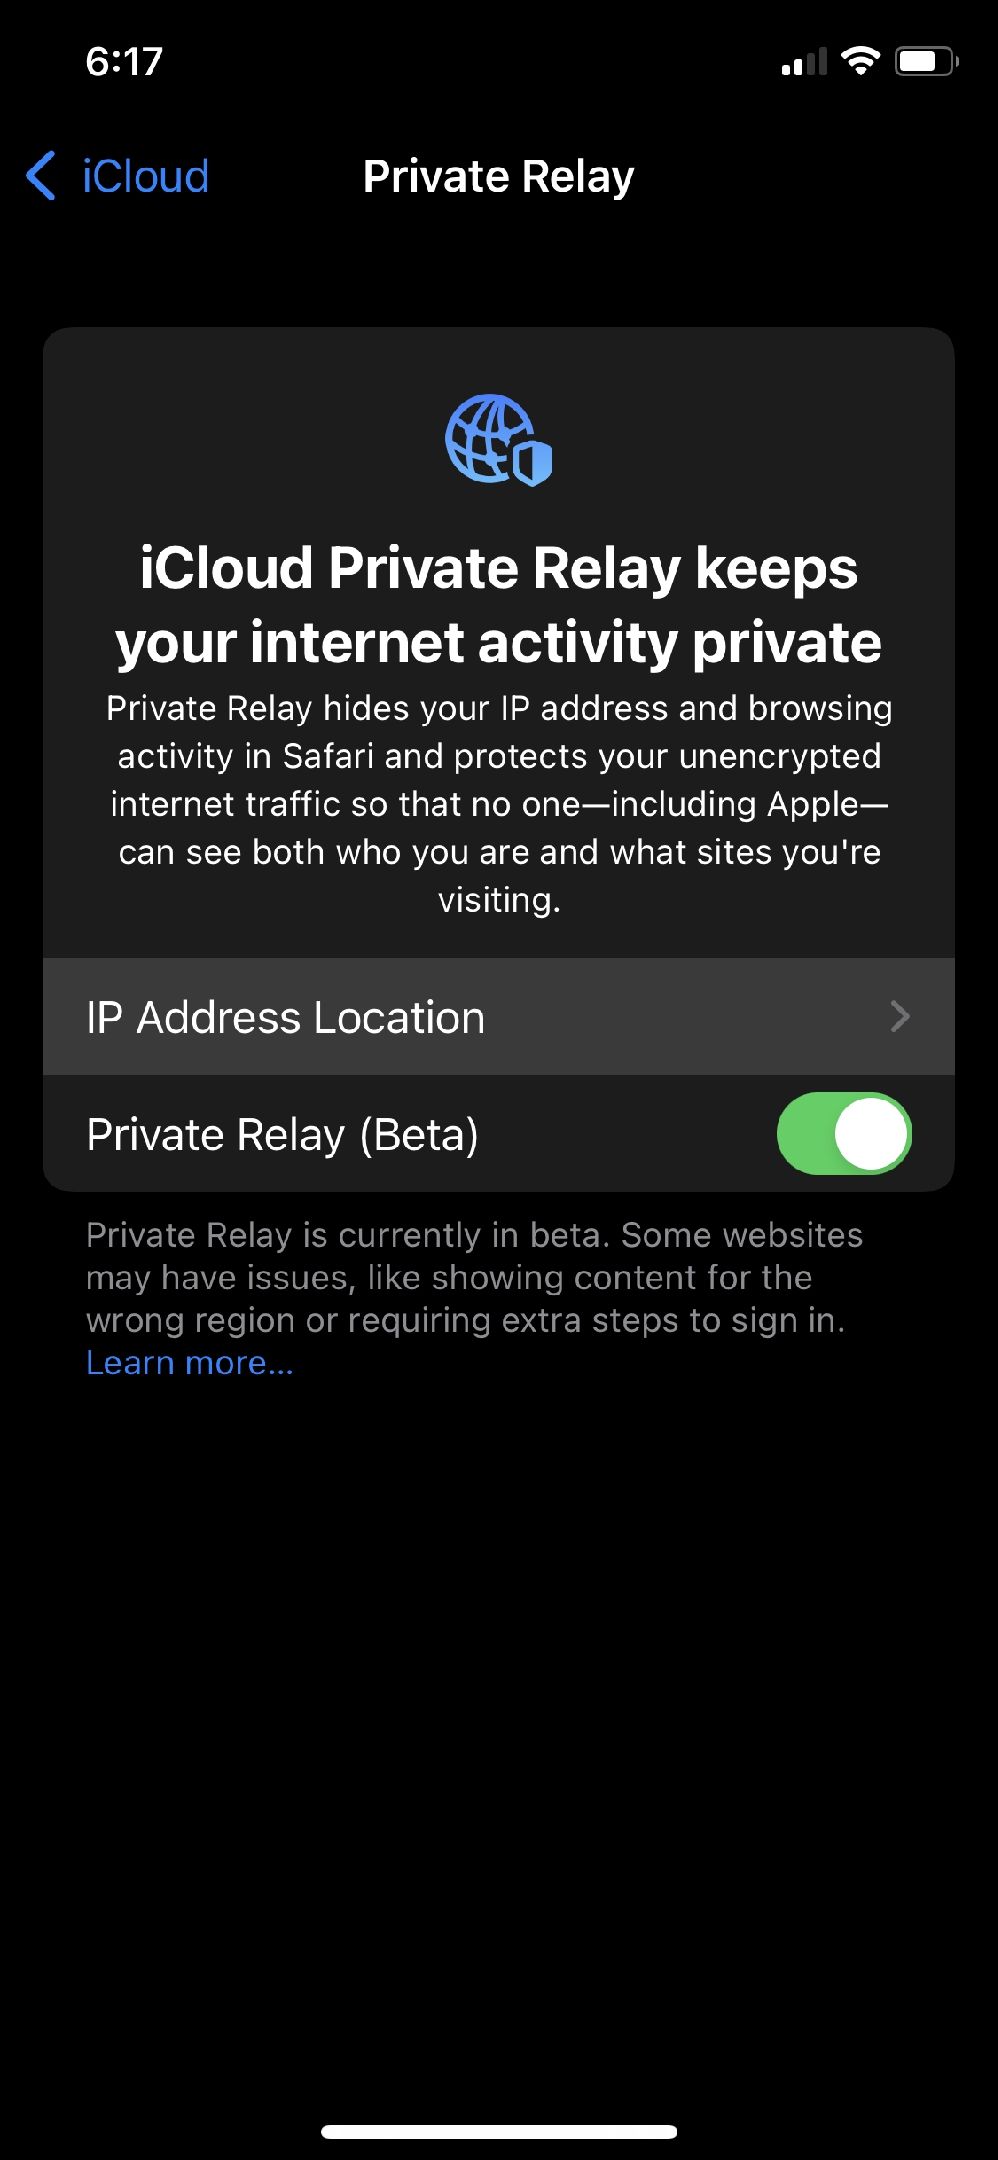 Enabling Private Relay on iPhone